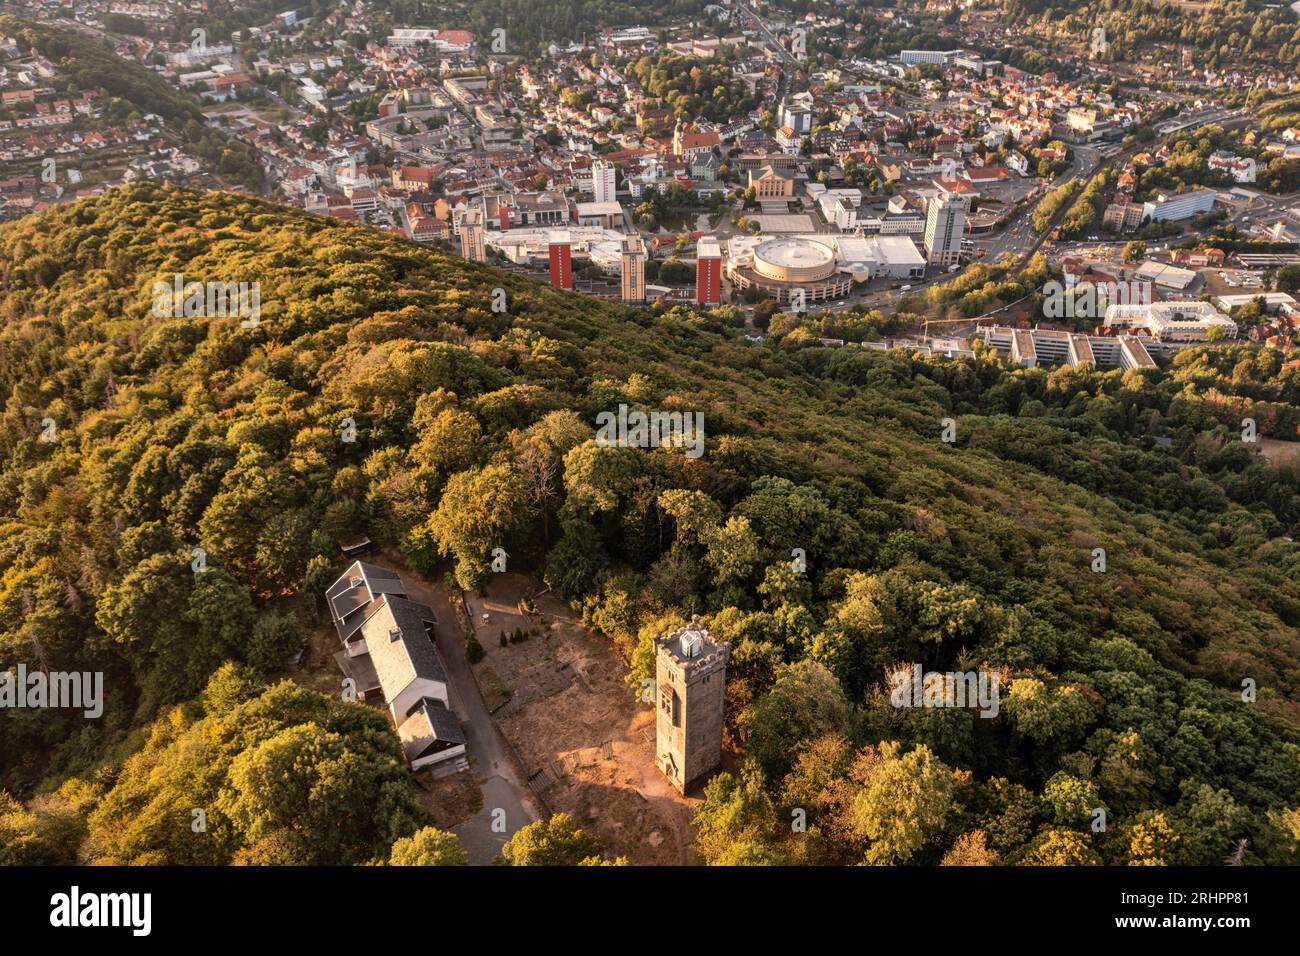 Germany, Thuringia, Suhl, Dombergturm, city, Congress Centrum, forest, mountain, overview, aerial photo Stock Photo